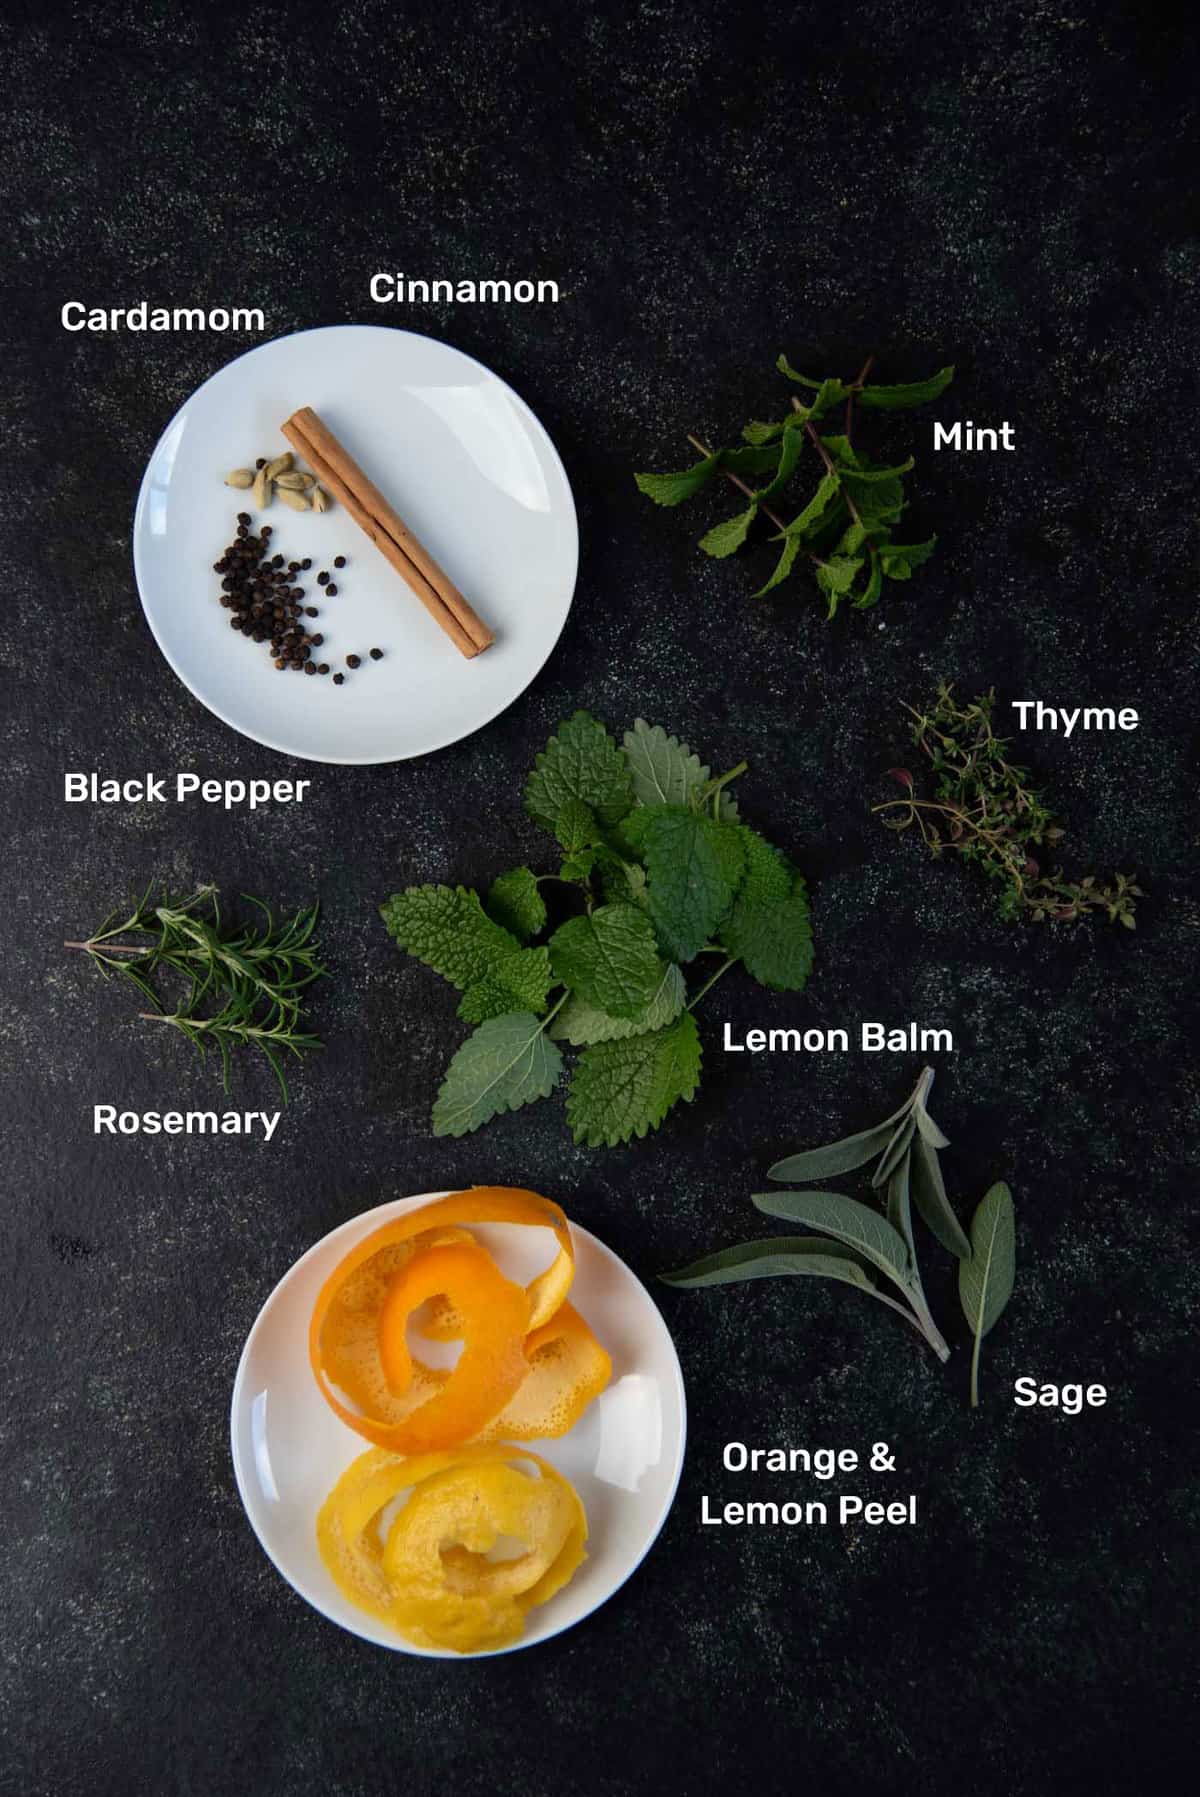 Spices and herbs used to make infused gin as a quick replacement for chartreuse.